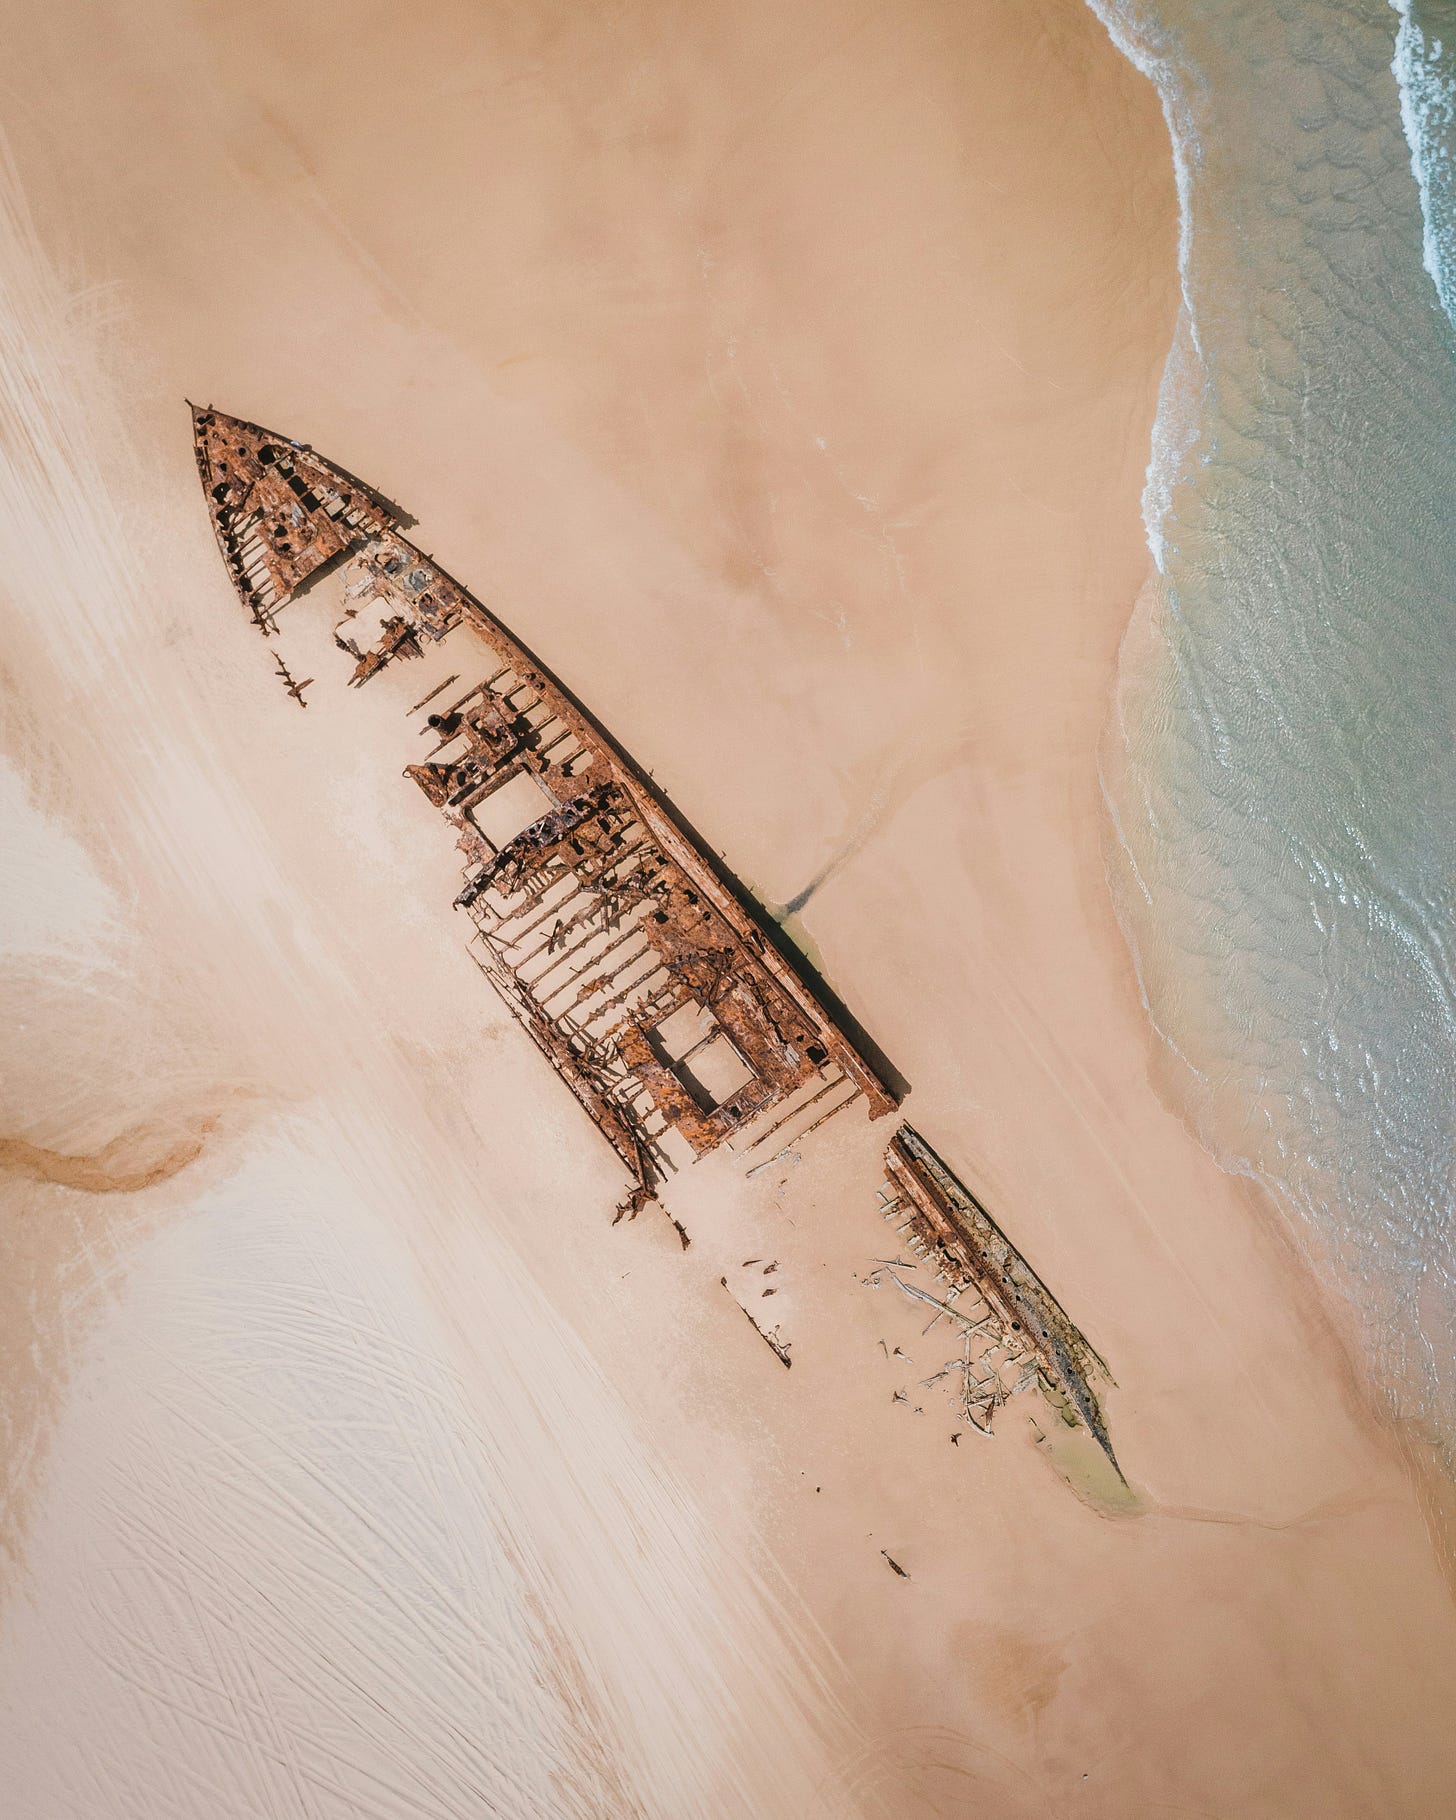 Hull of wrecked ship buried in sand